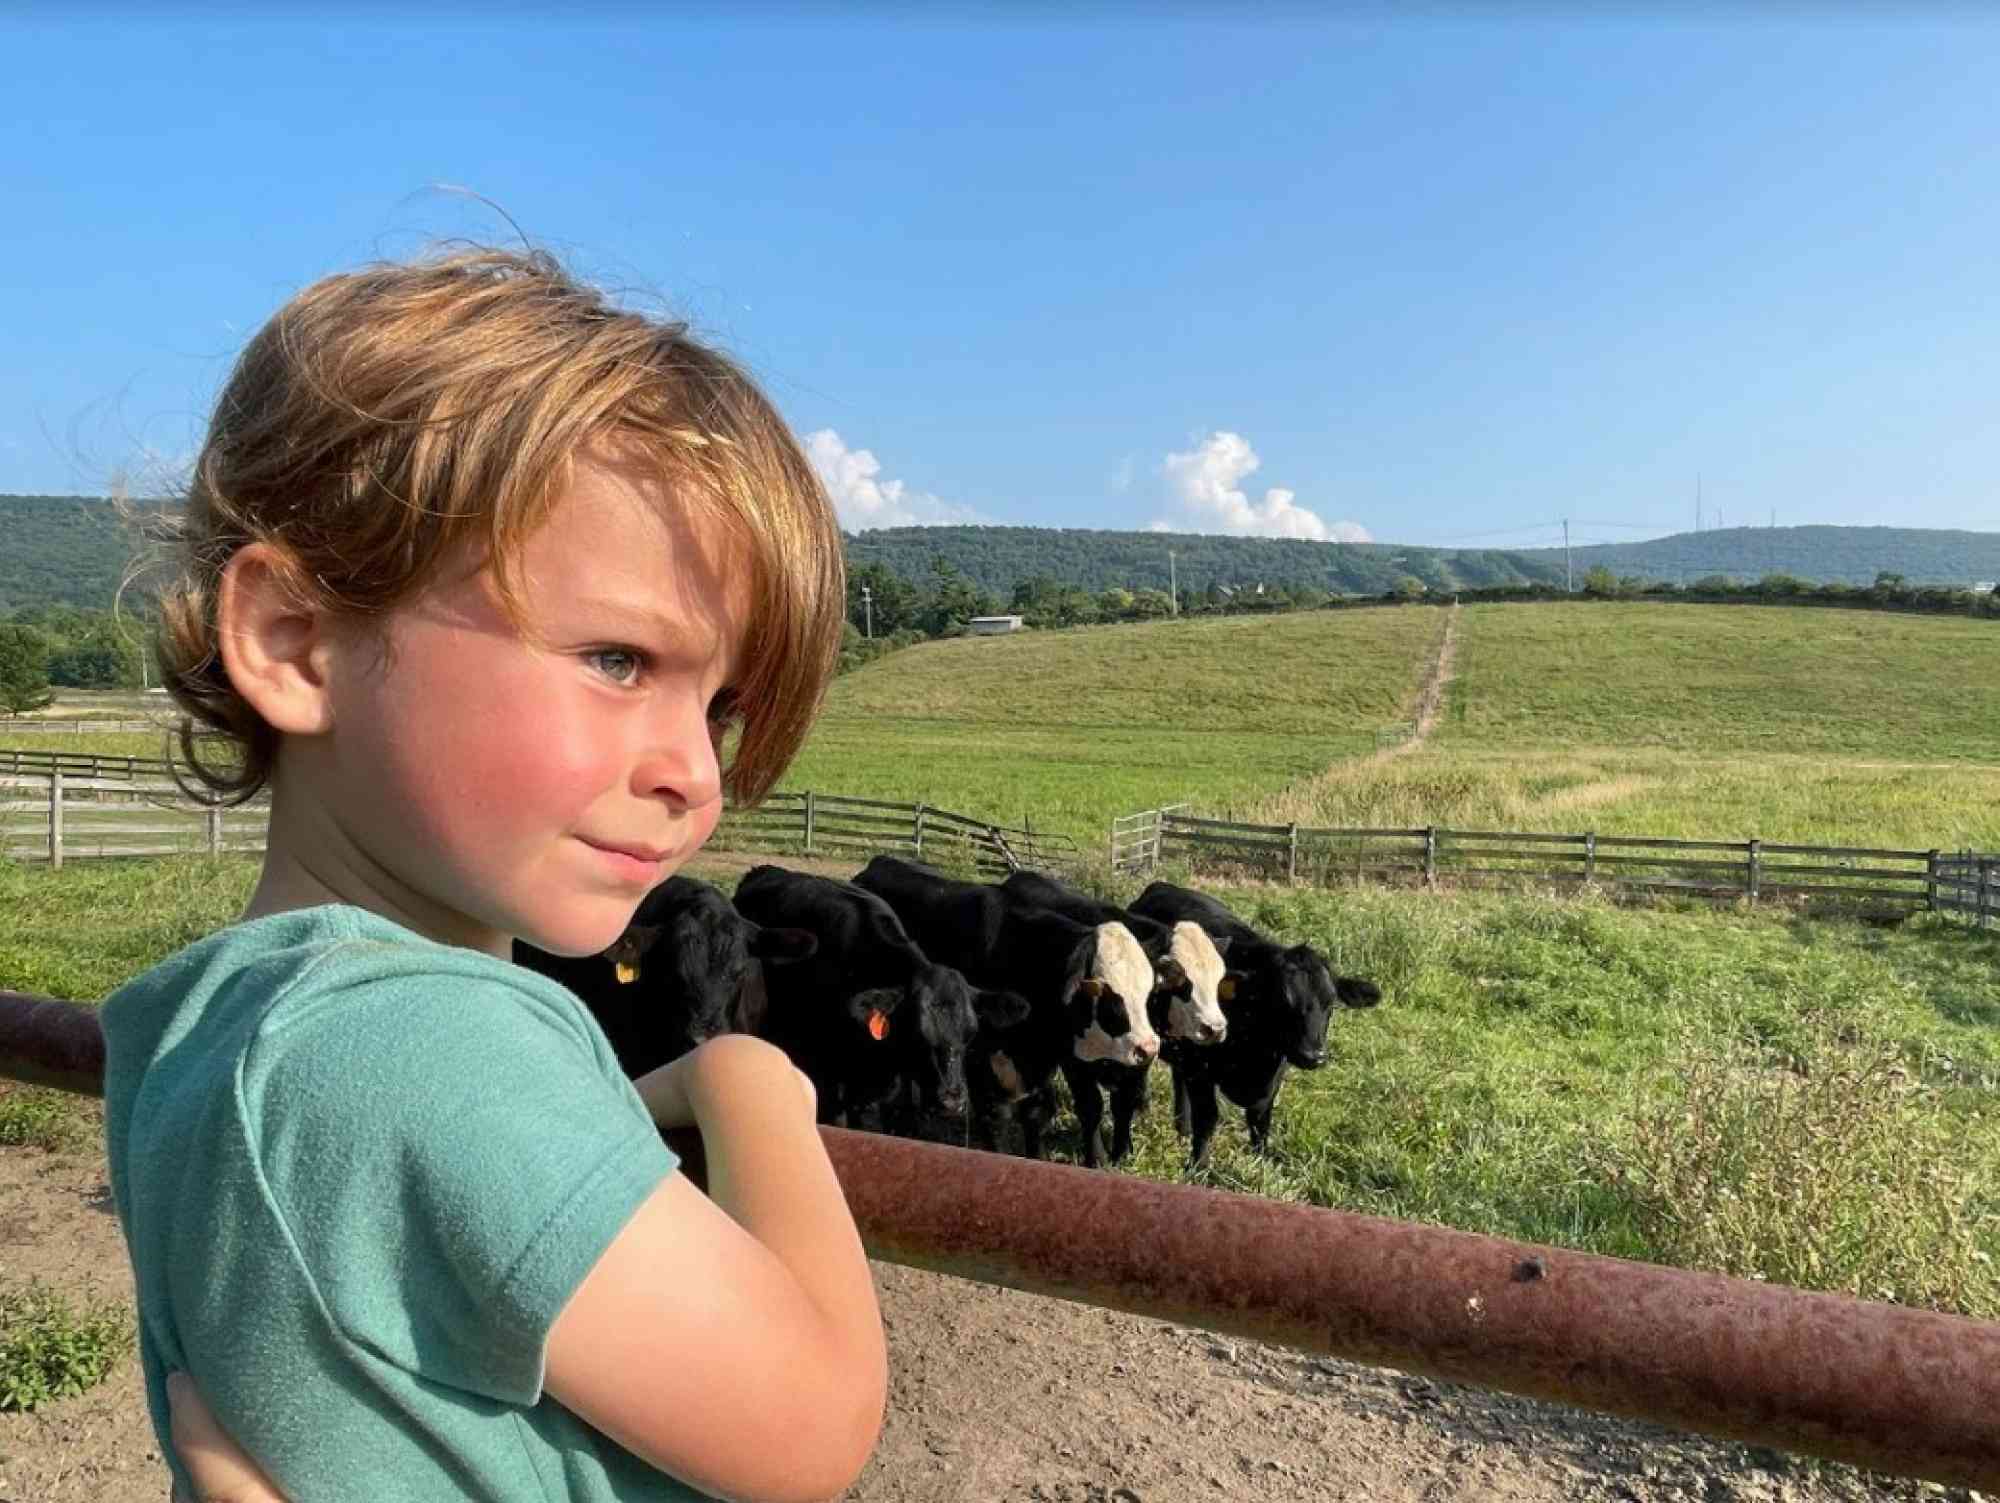 Boy with cows